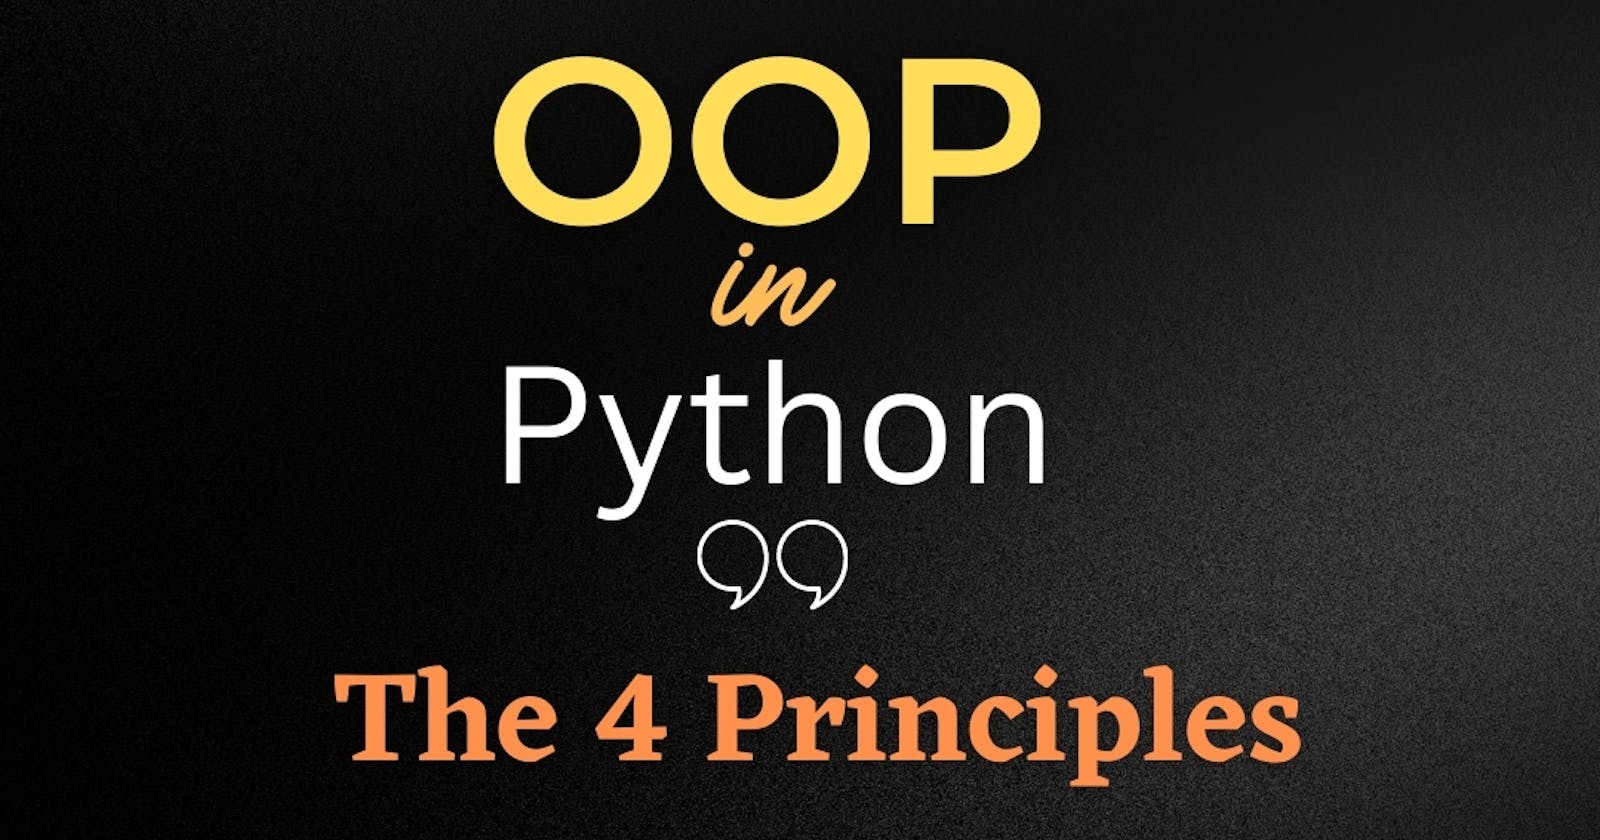 The 4 principles of OOP in Python and how to implement them in your code